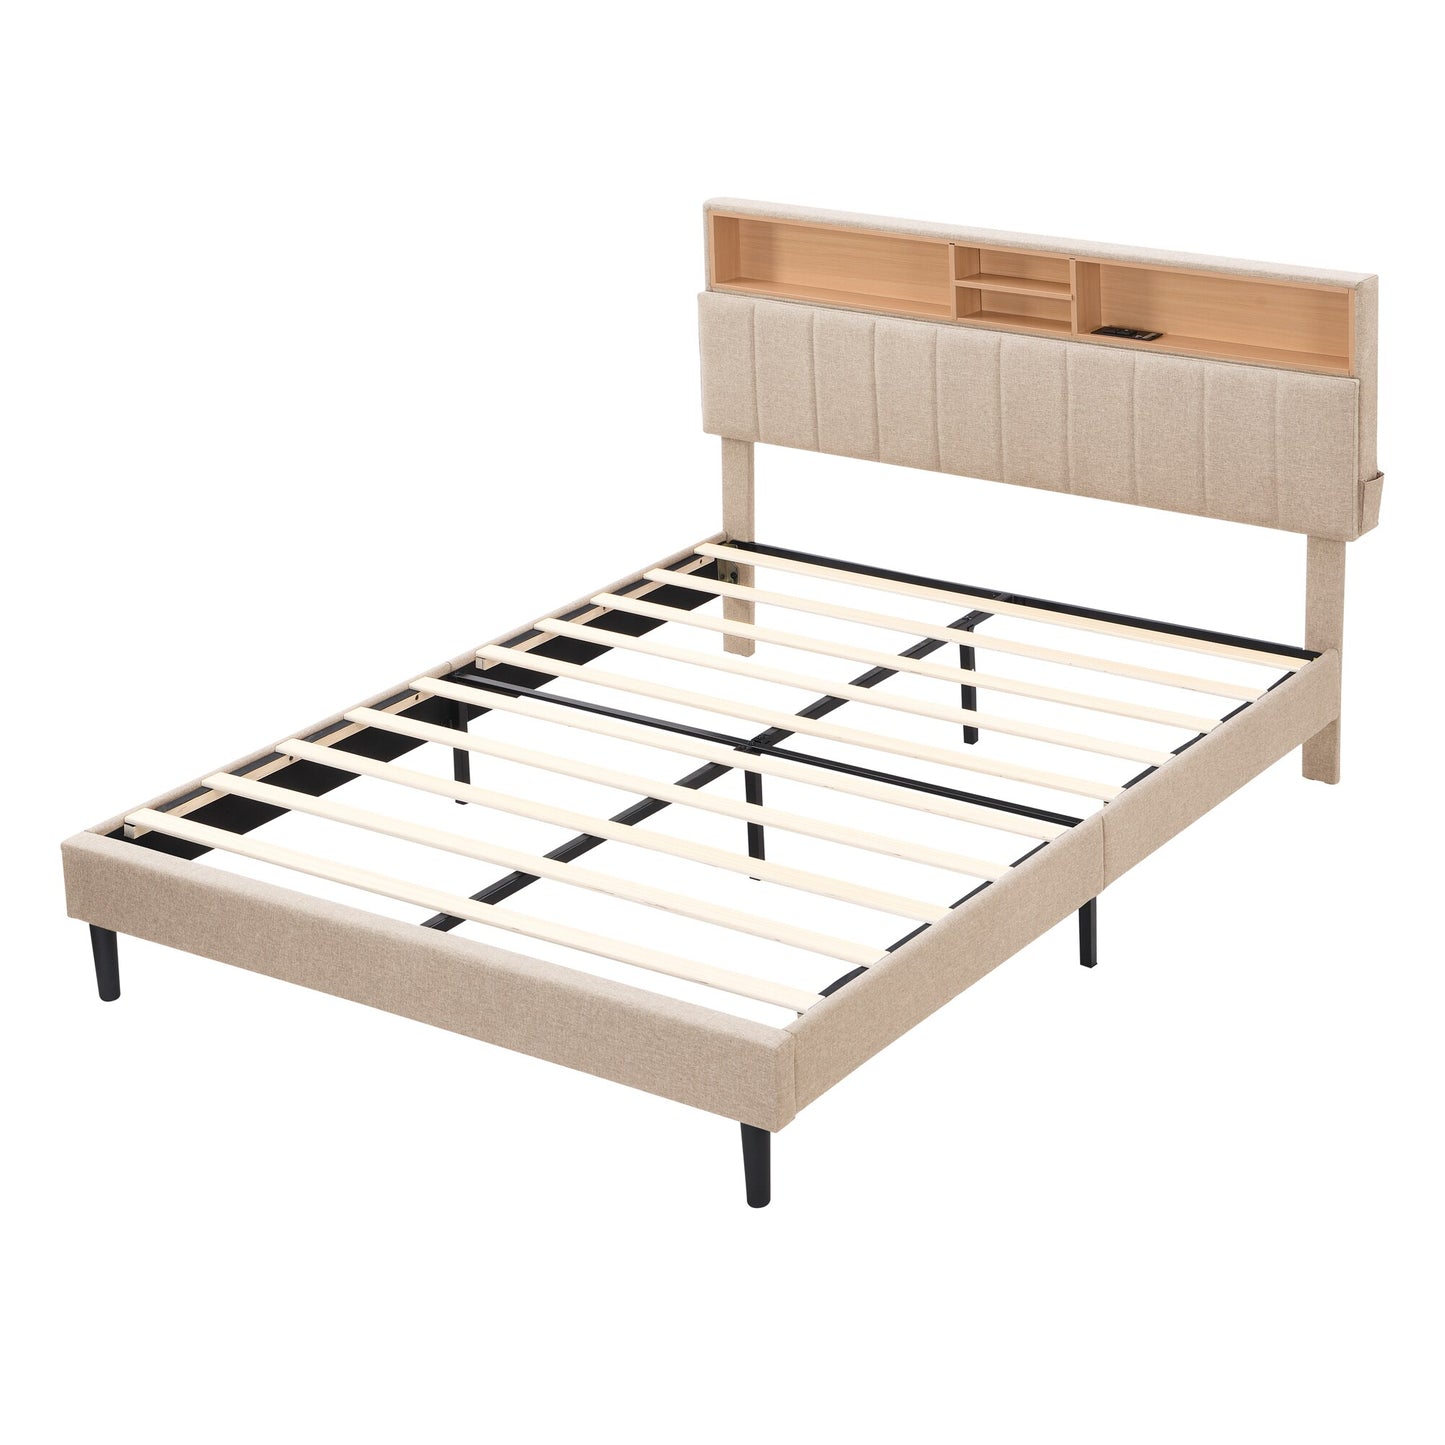 Modern Upholstered Bed with Storage and USB Port | Wood and Linen | Queen/Full Size